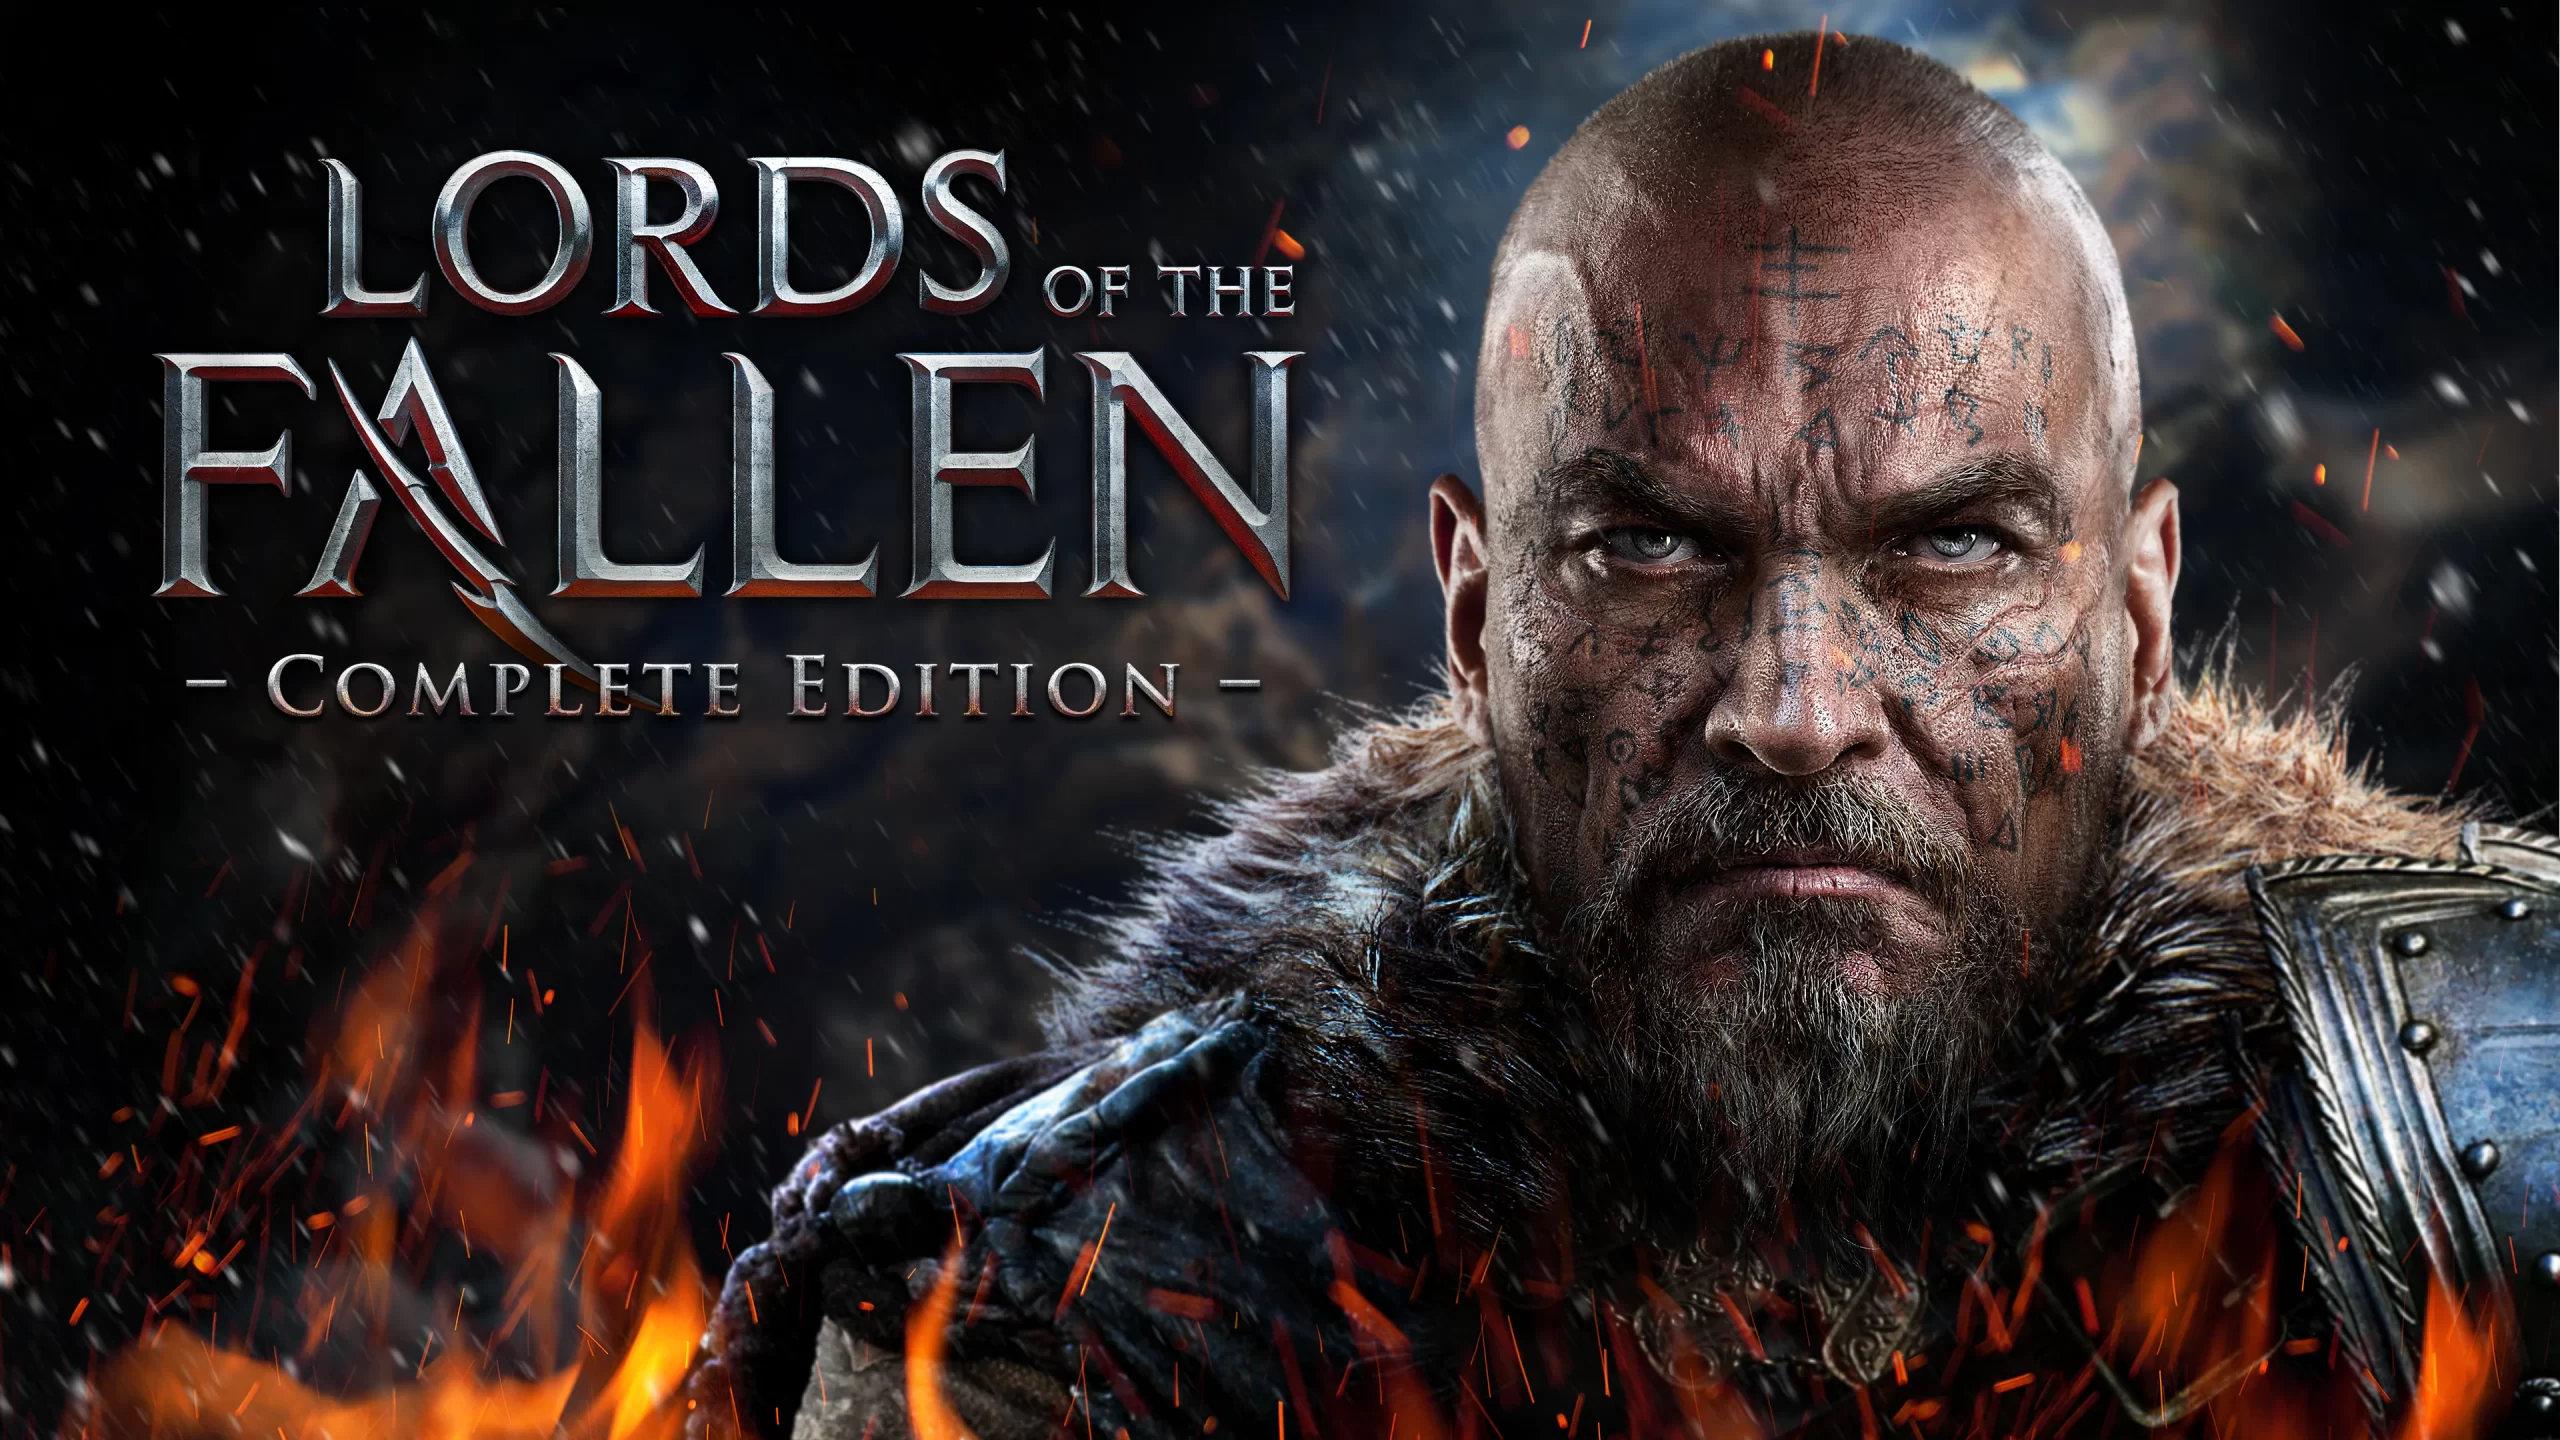 Review of Lords of the Fallen: Dark Slog